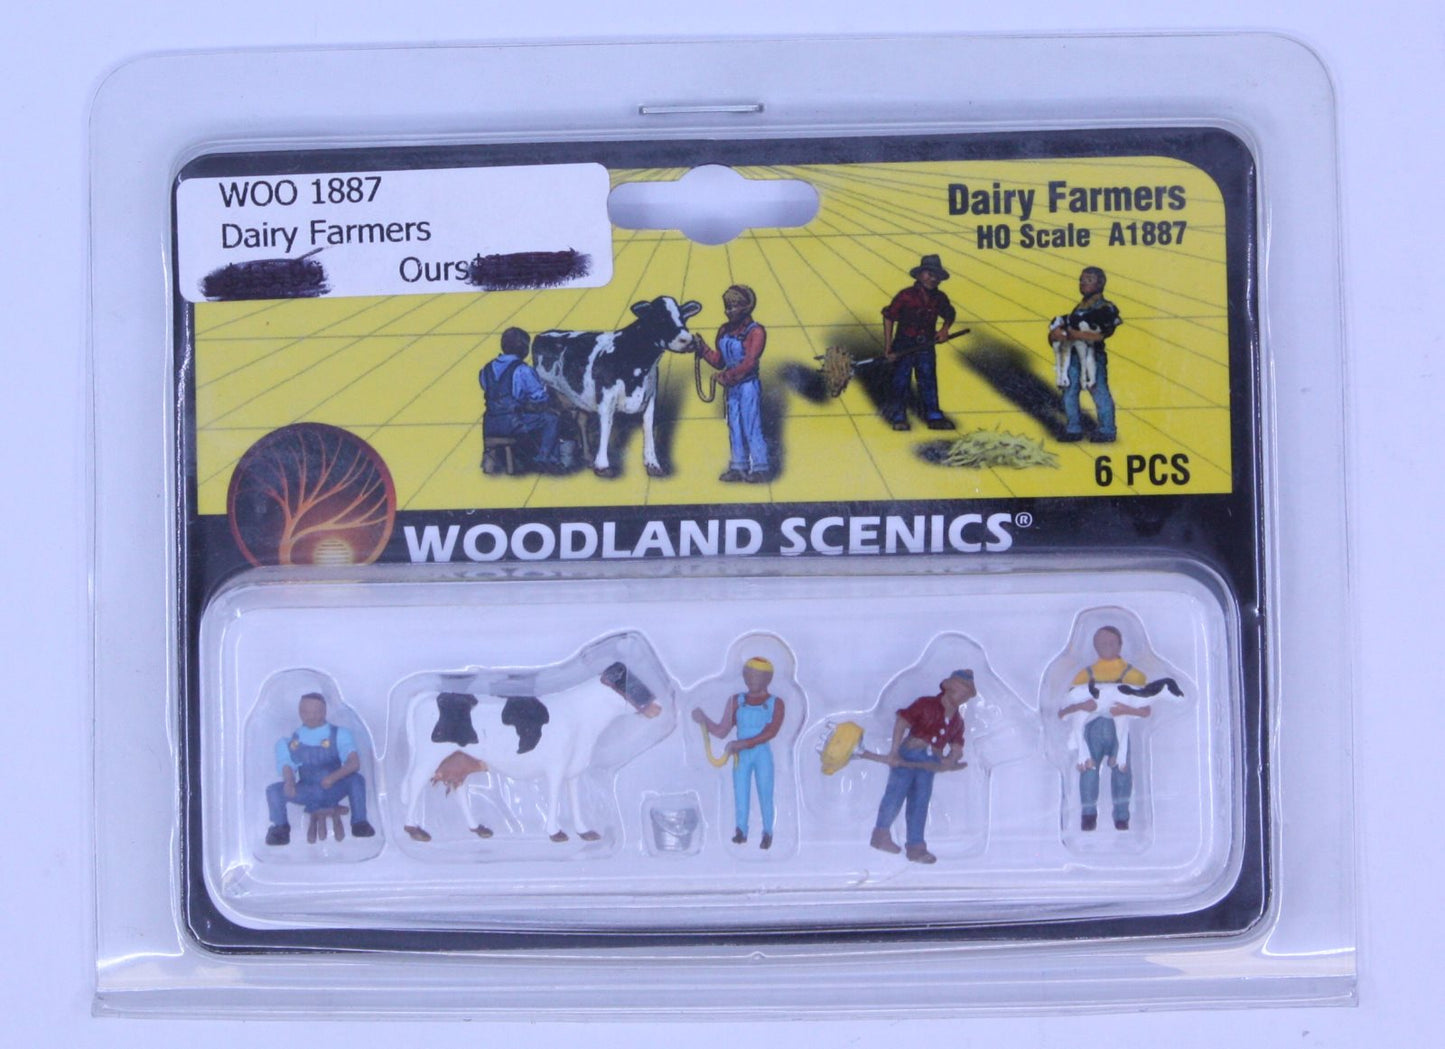 Woodland Scenics A1887 HO Scenic Accents Dairy Farmers Figures (Set of 6)